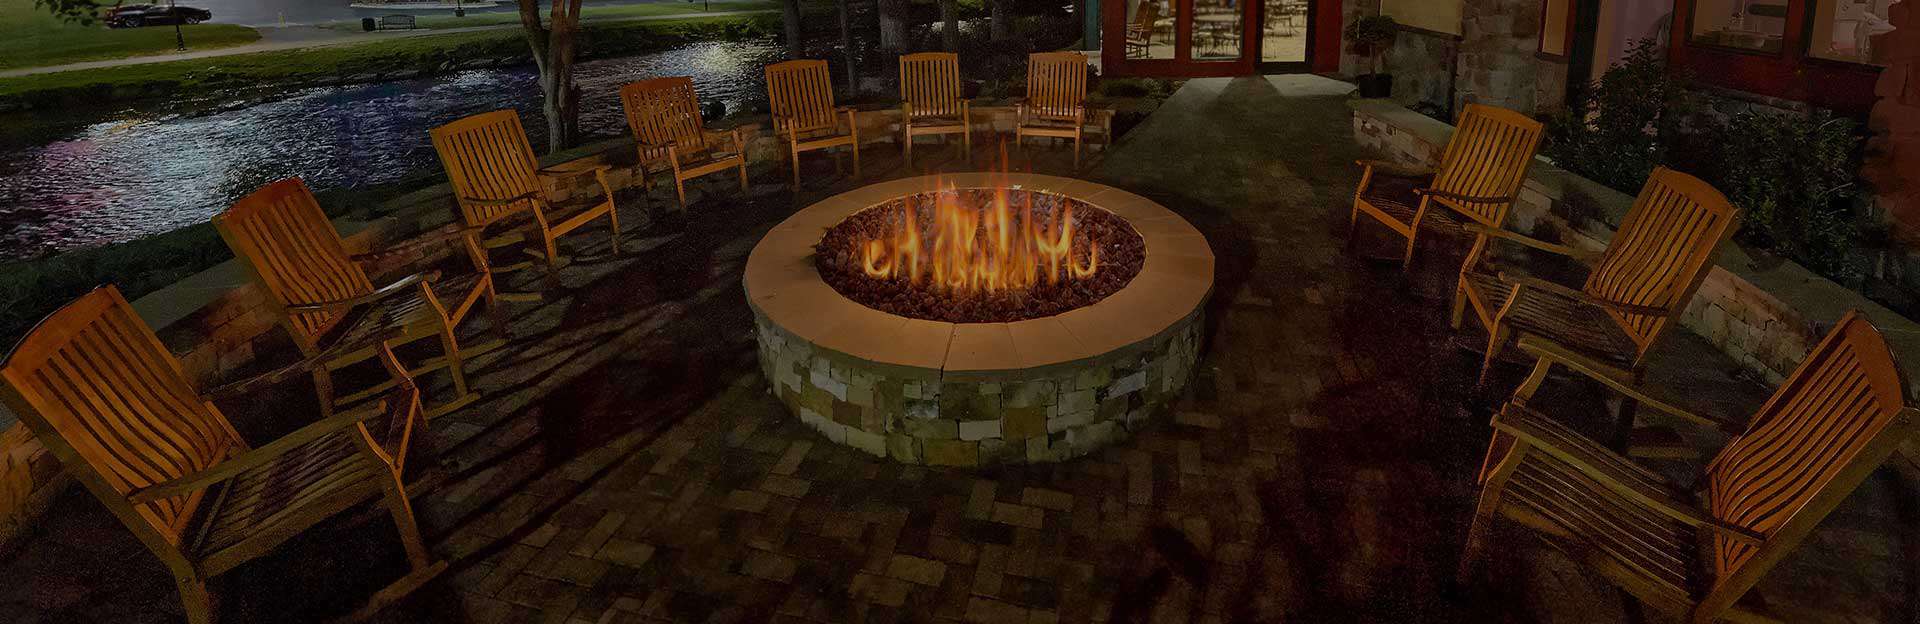 fireplace with chairs